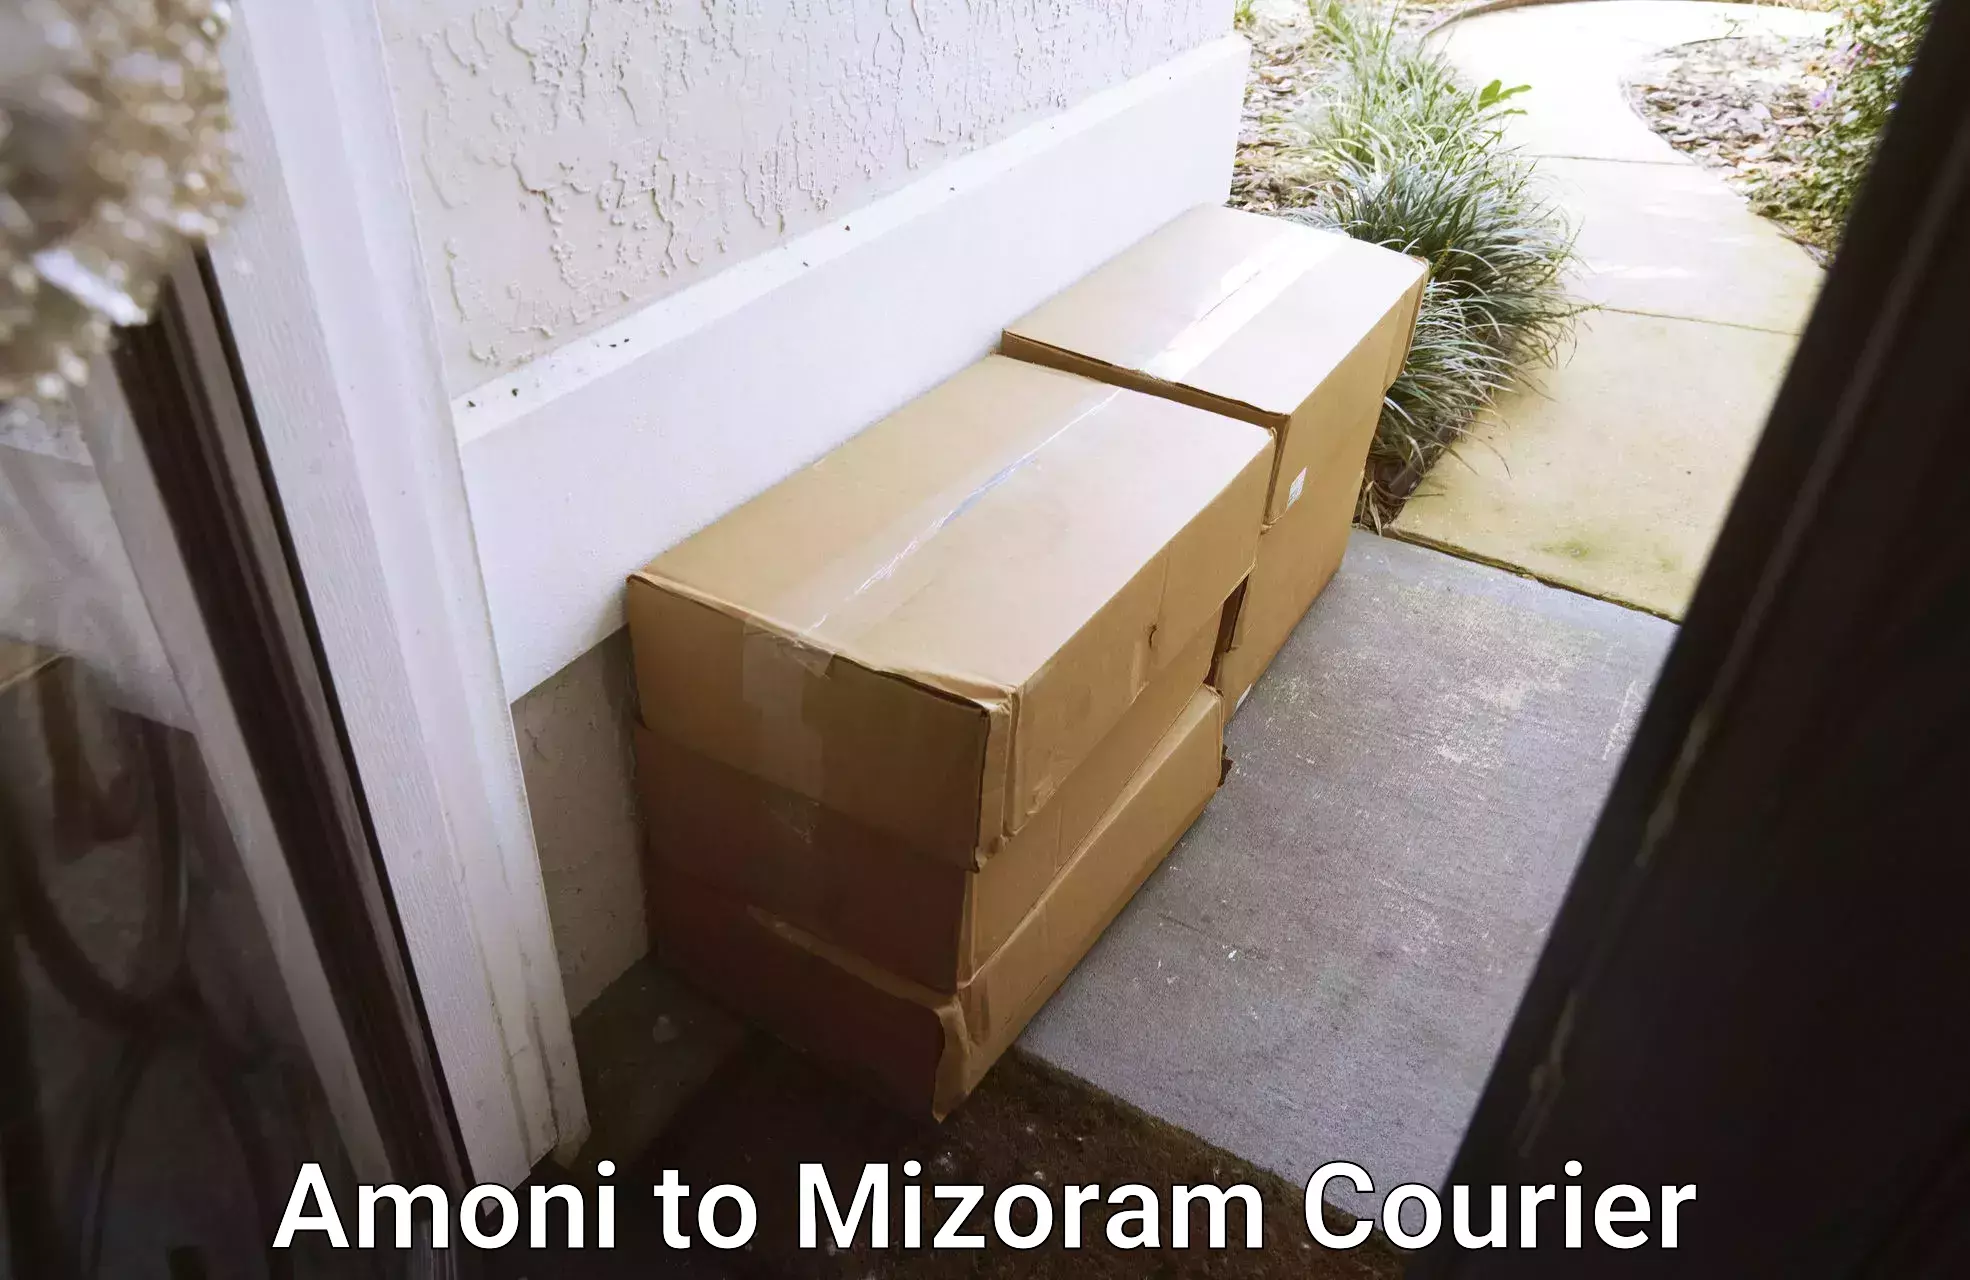 Next-day delivery options Amoni to Darlawn